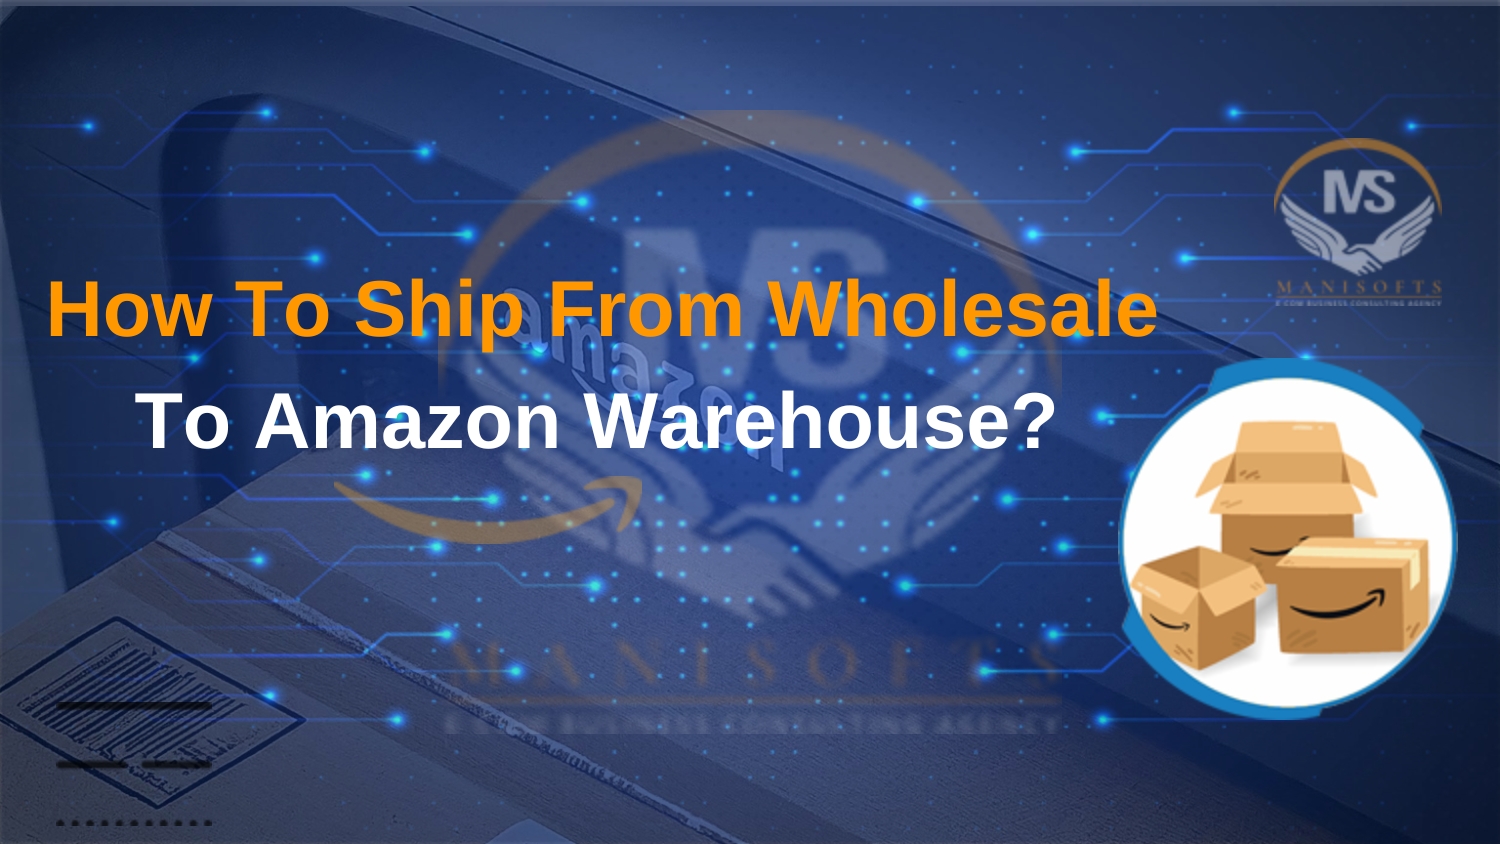 How To Ship From Wholesale To Amazon Warehouse